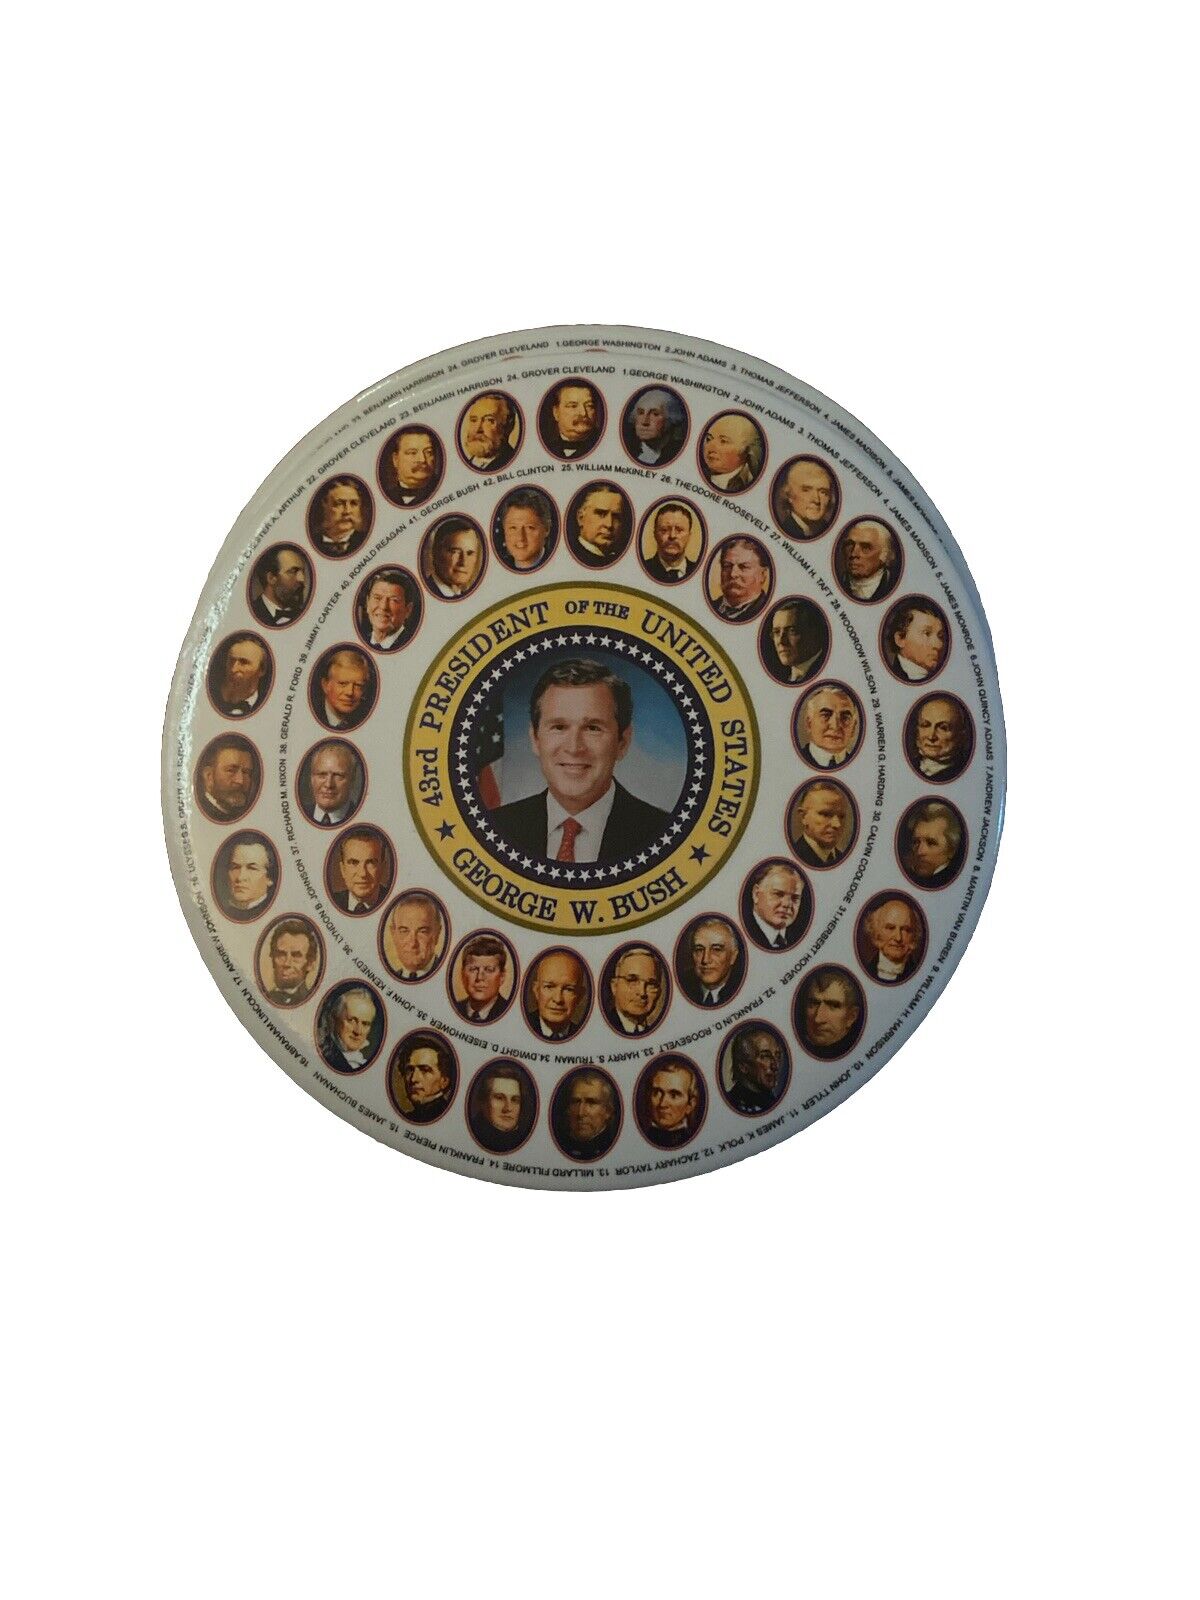 43rd President of the United States - George W. Bush | 2001 Jumbo Button